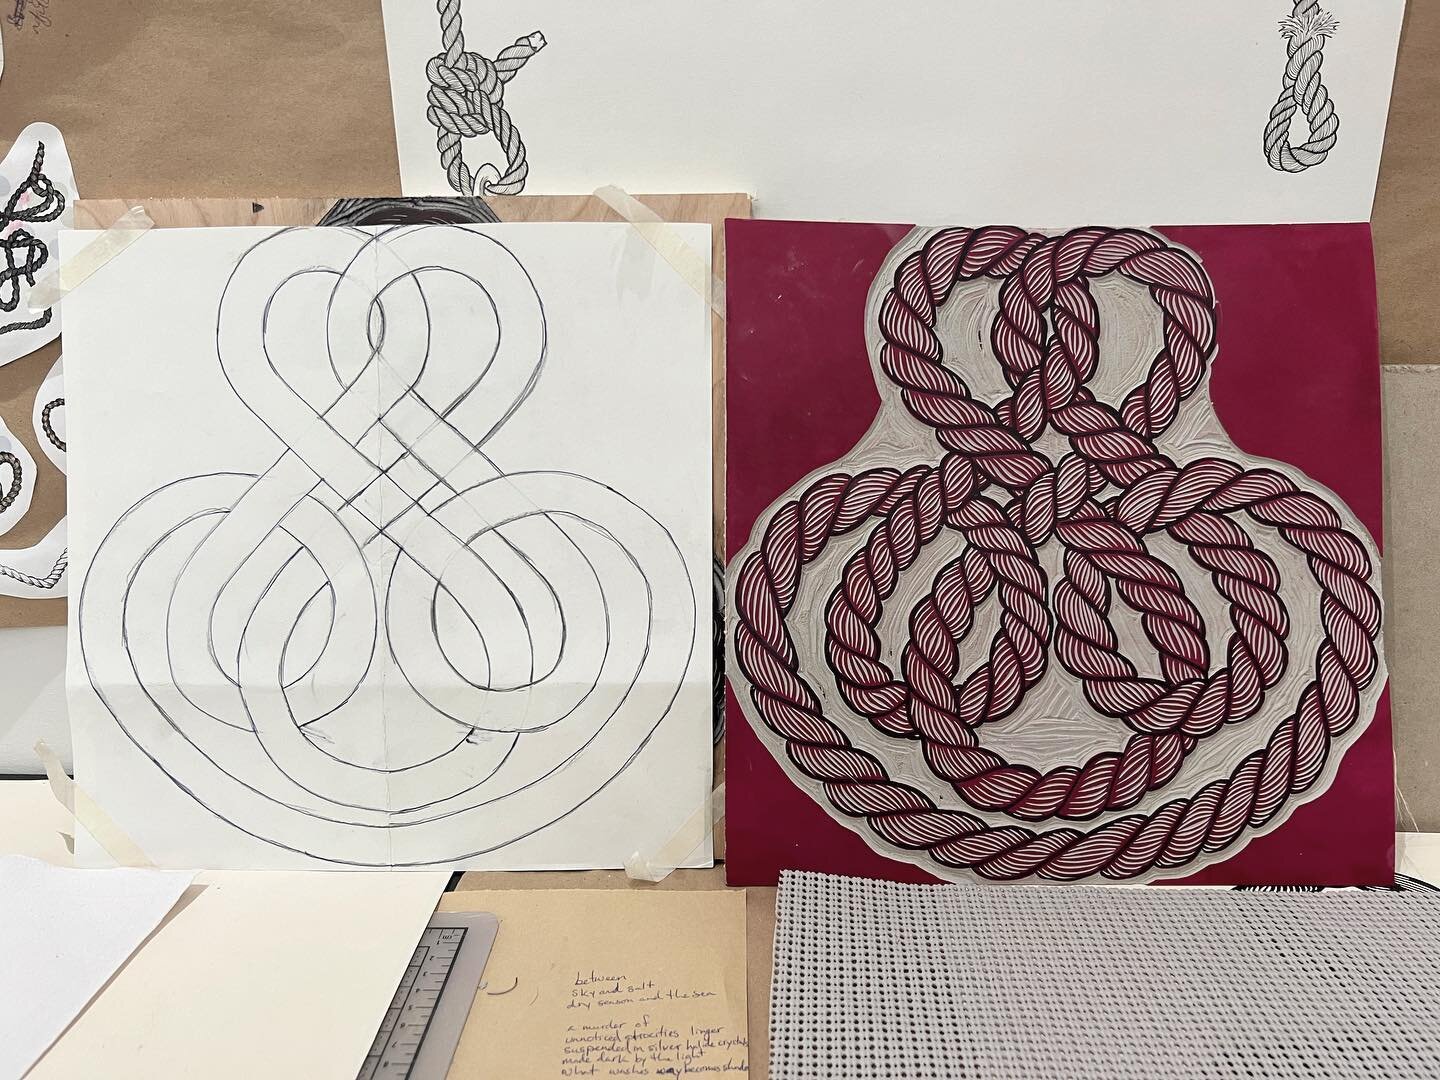 That&rsquo;s the second of my endless knots carved and ready to print. I&rsquo;m going to wait to do the actual printing until I&rsquo;ve carved all 9 because the press setup with be identical for all of them. #guidebooktoknotsforhumans #endlessknot 